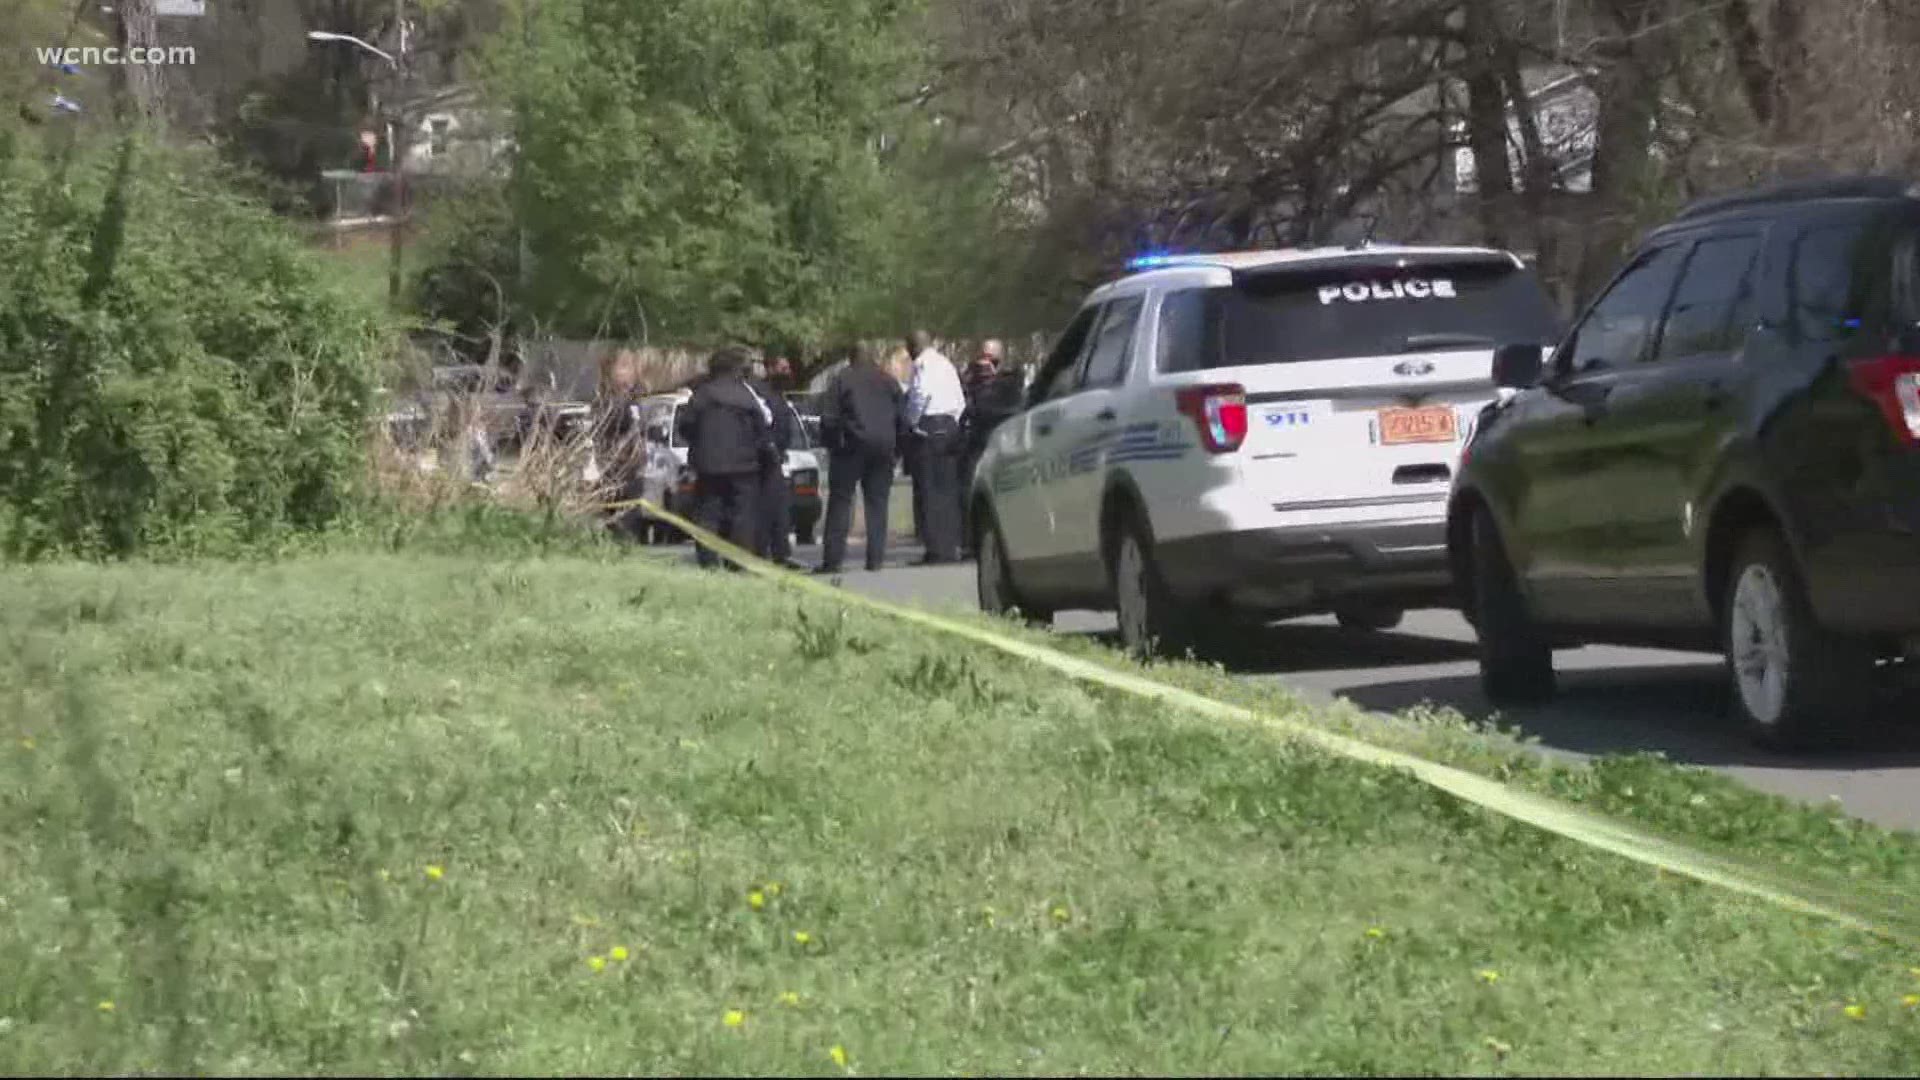 Police are investigating after a person was found dead along McArthur Avenue in north Charlotte.